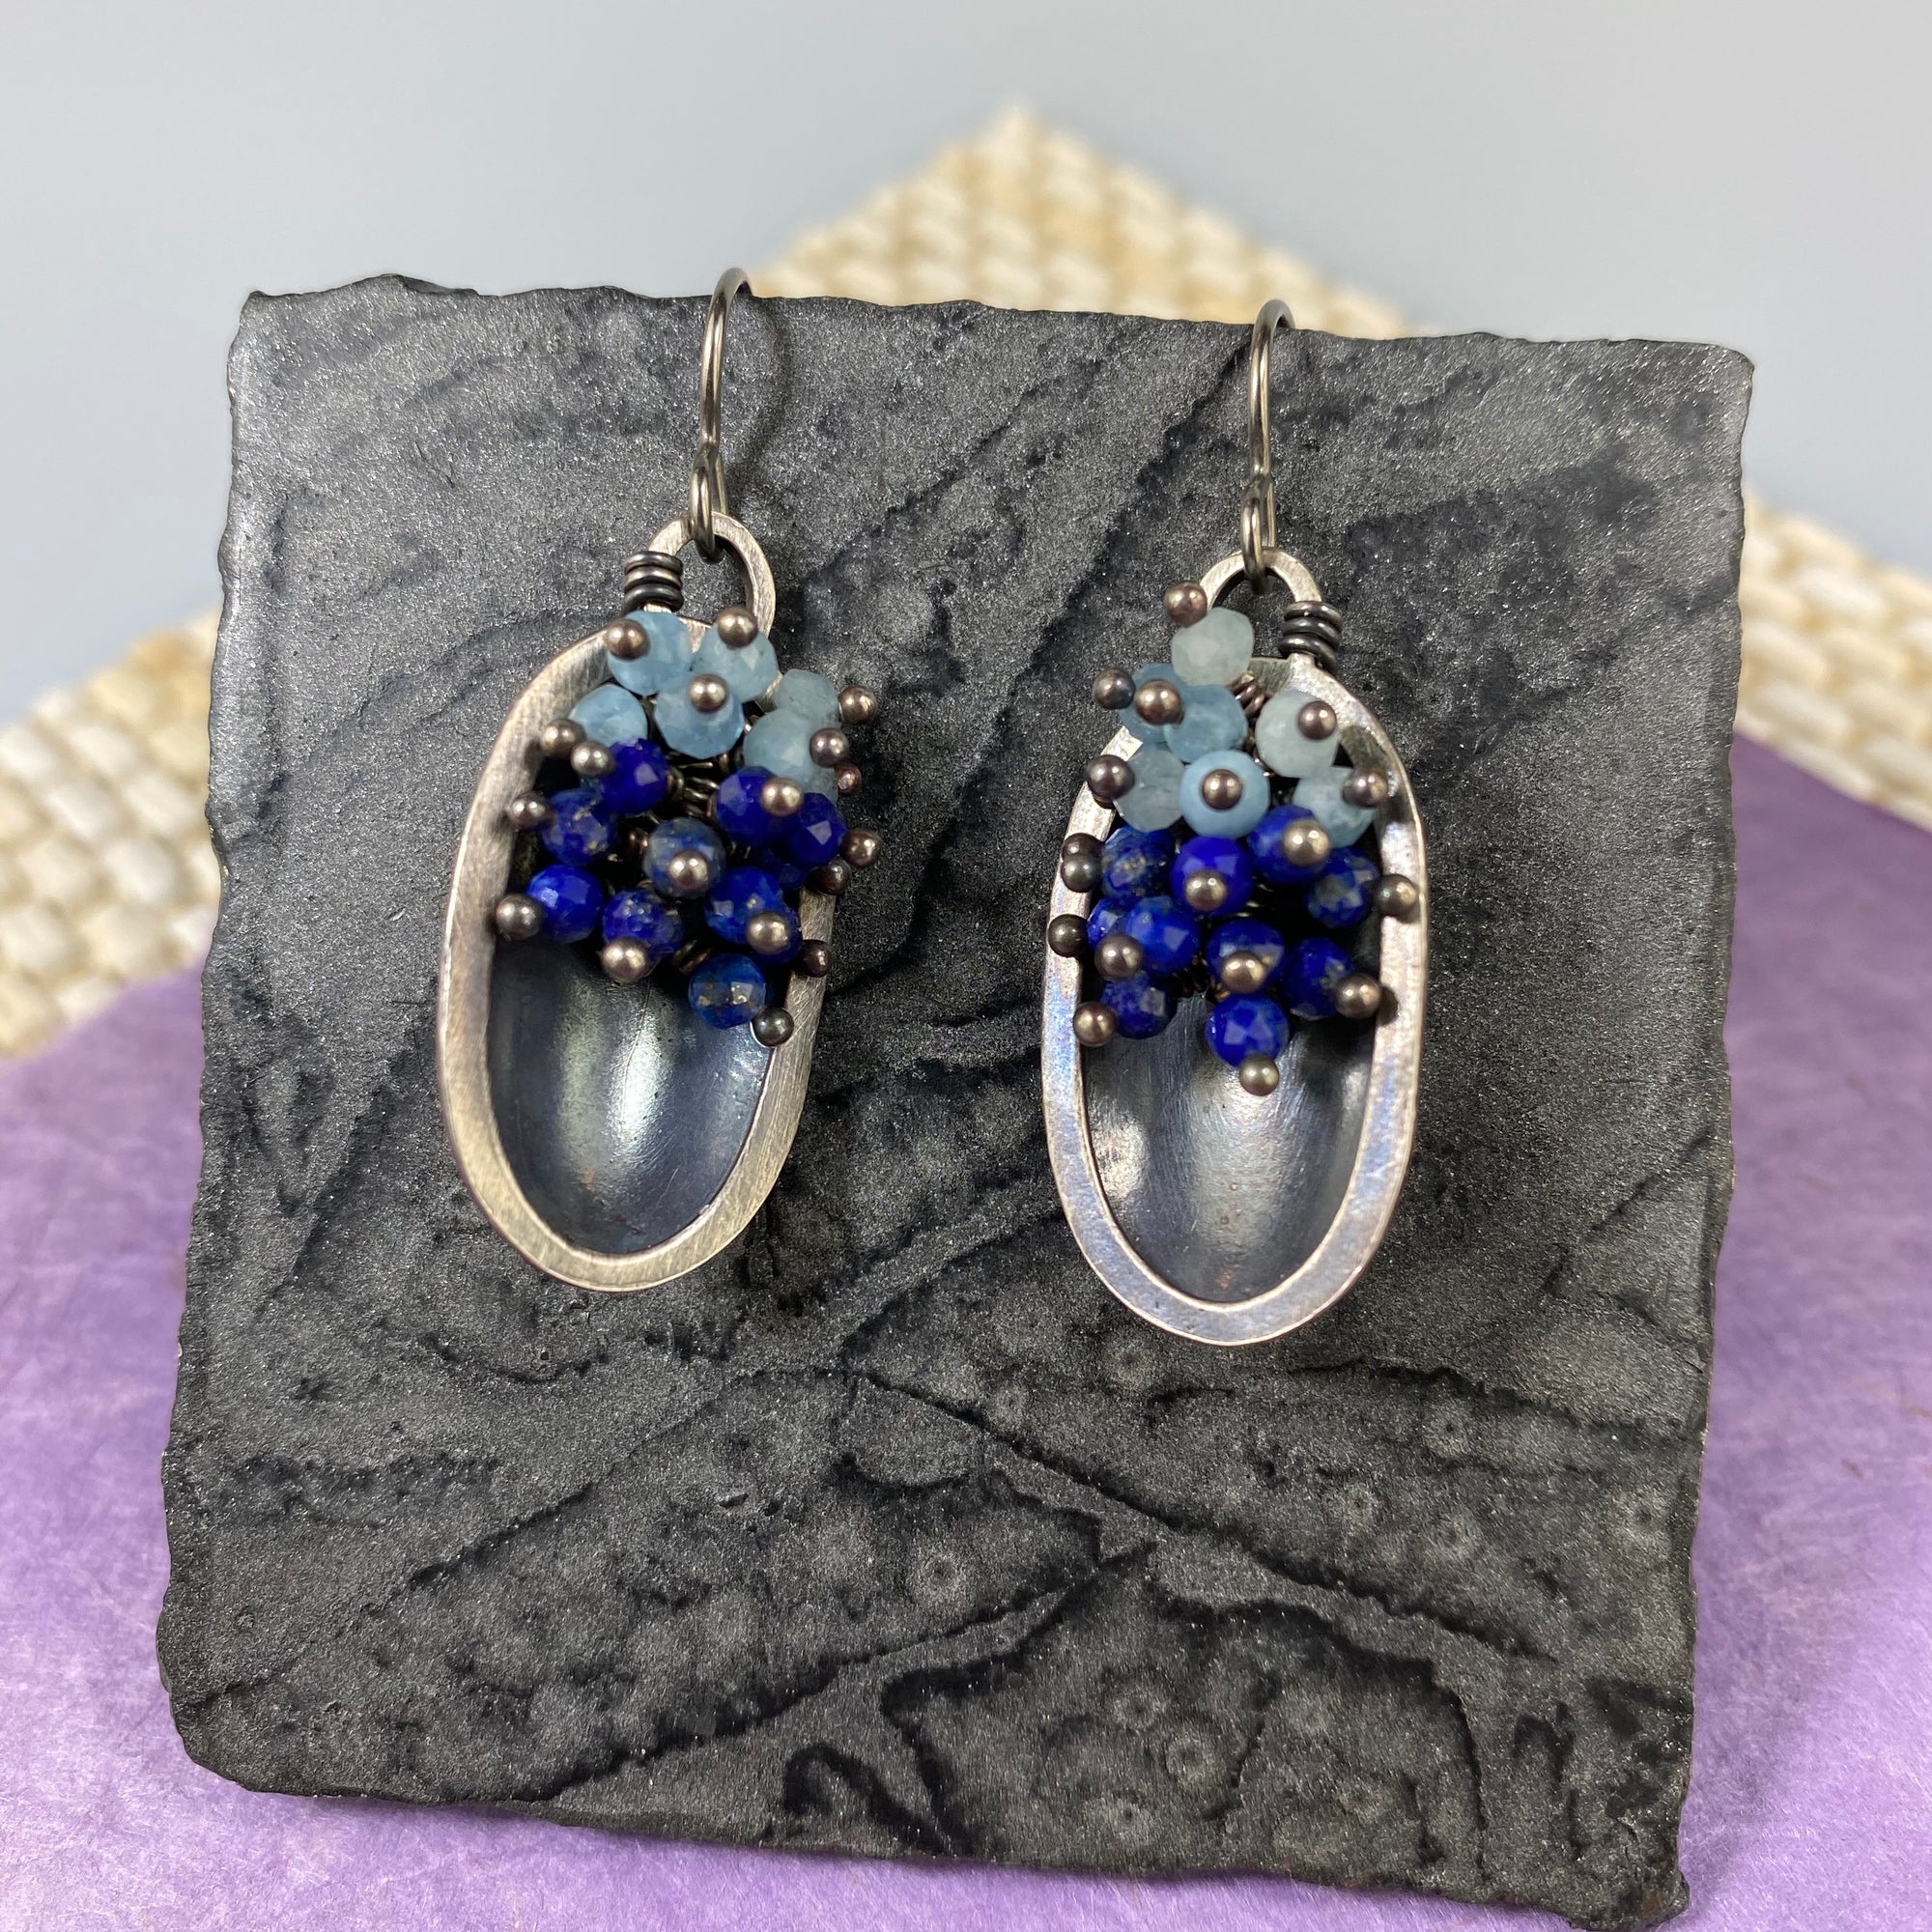 Seedlings Cluster Wire Earrings in Lapis & Aquamarine - Heart of the Home PA